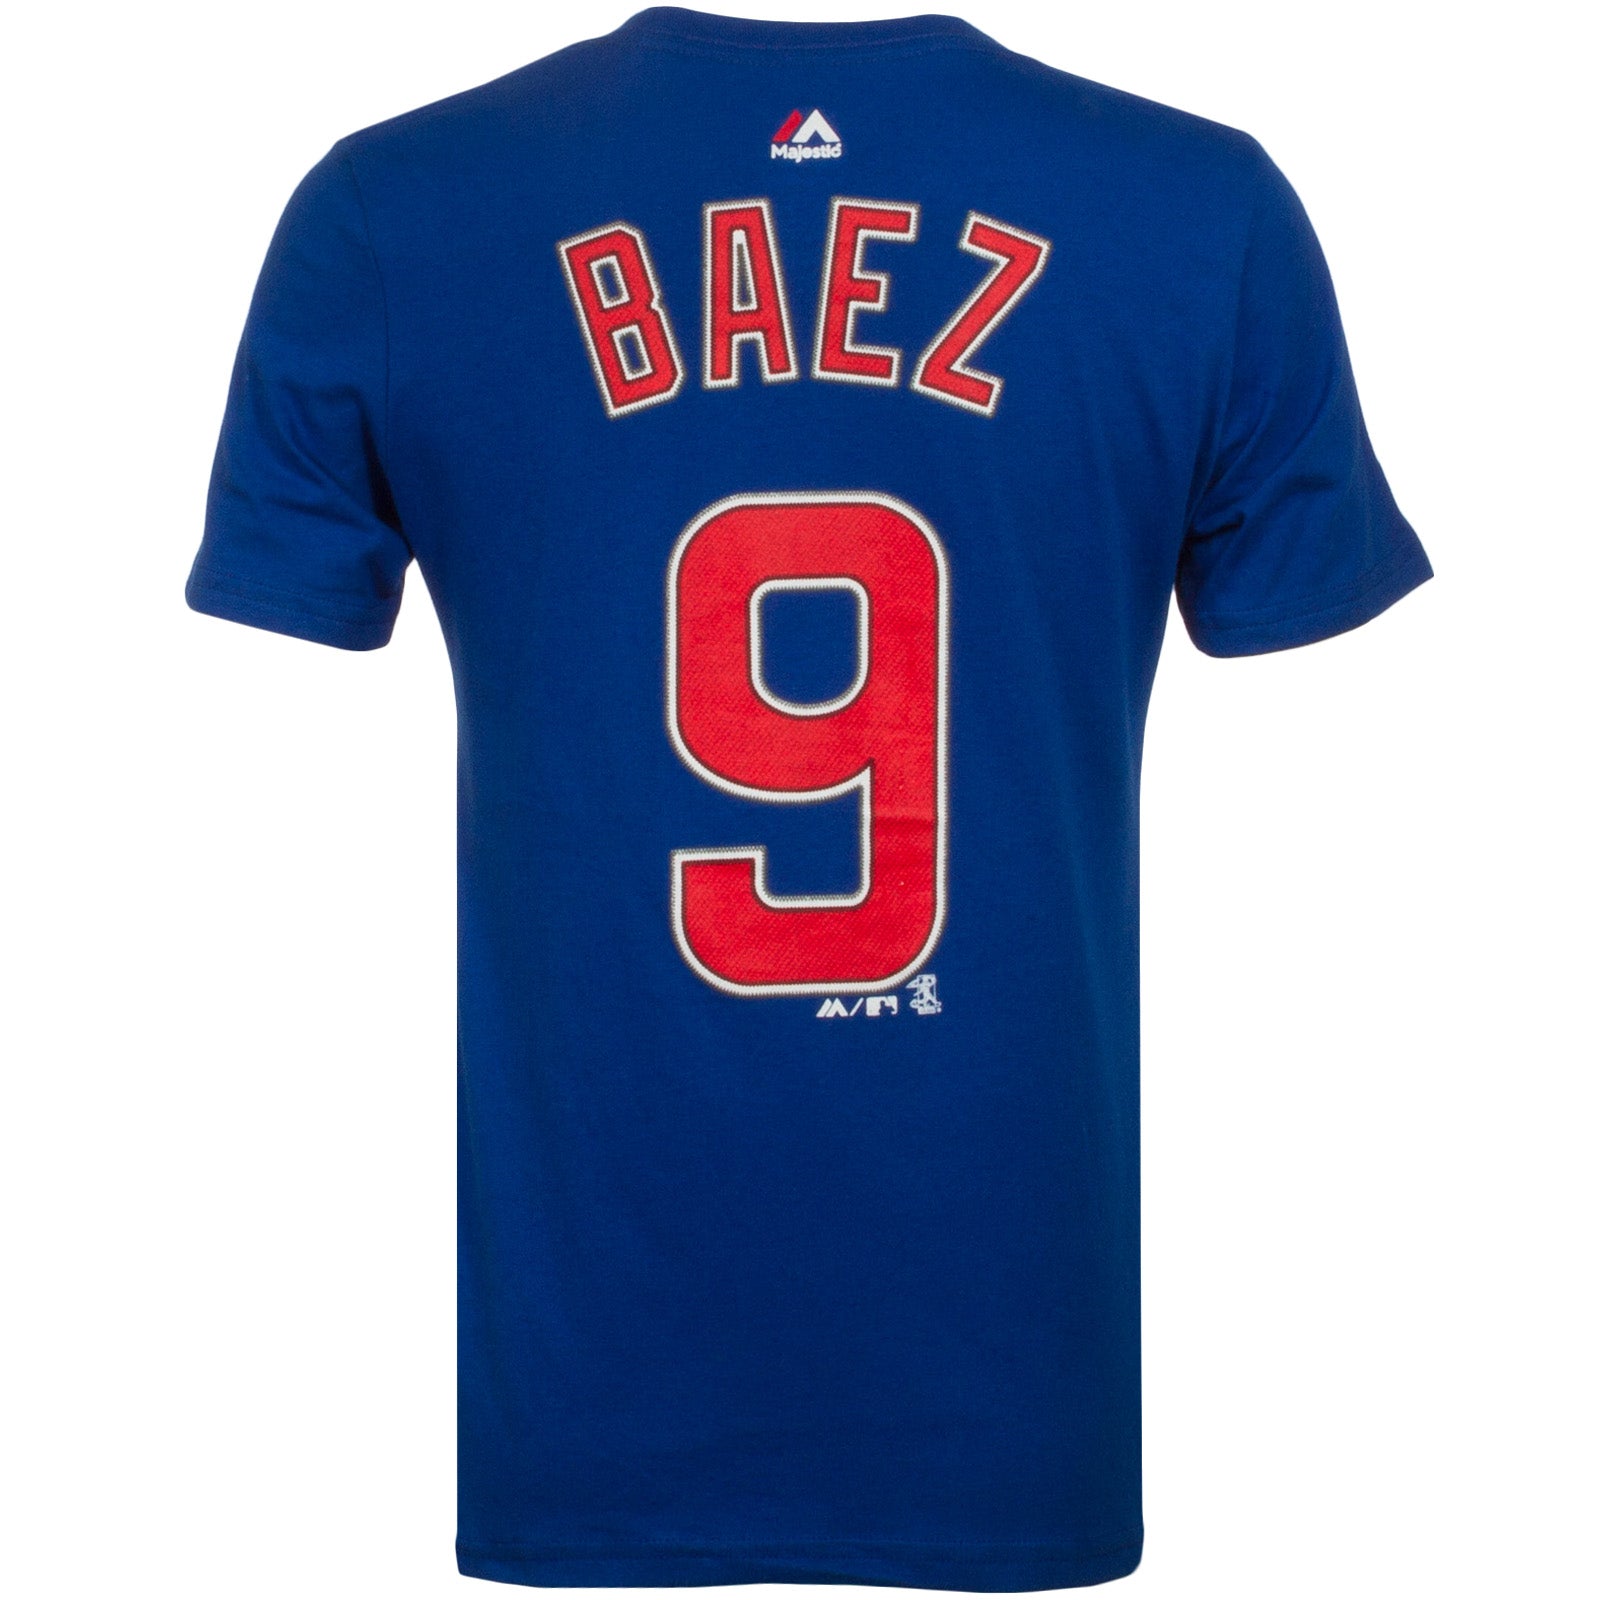 baez cubs jersey youth